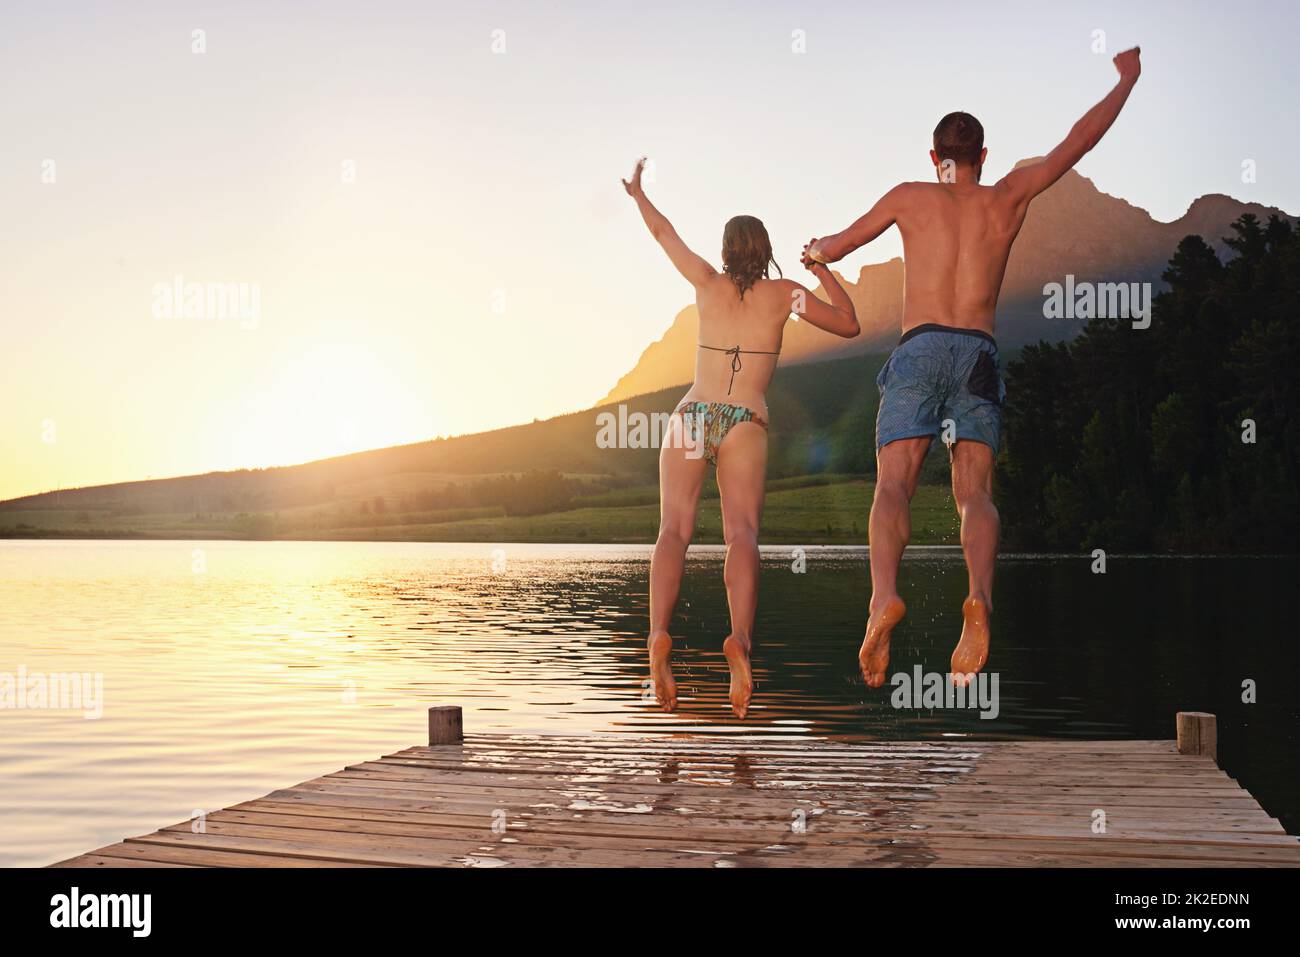 Taking the plunge. Rearview shot of a young couple in swimsuits leaping of a dock at sunset. Stock Photo